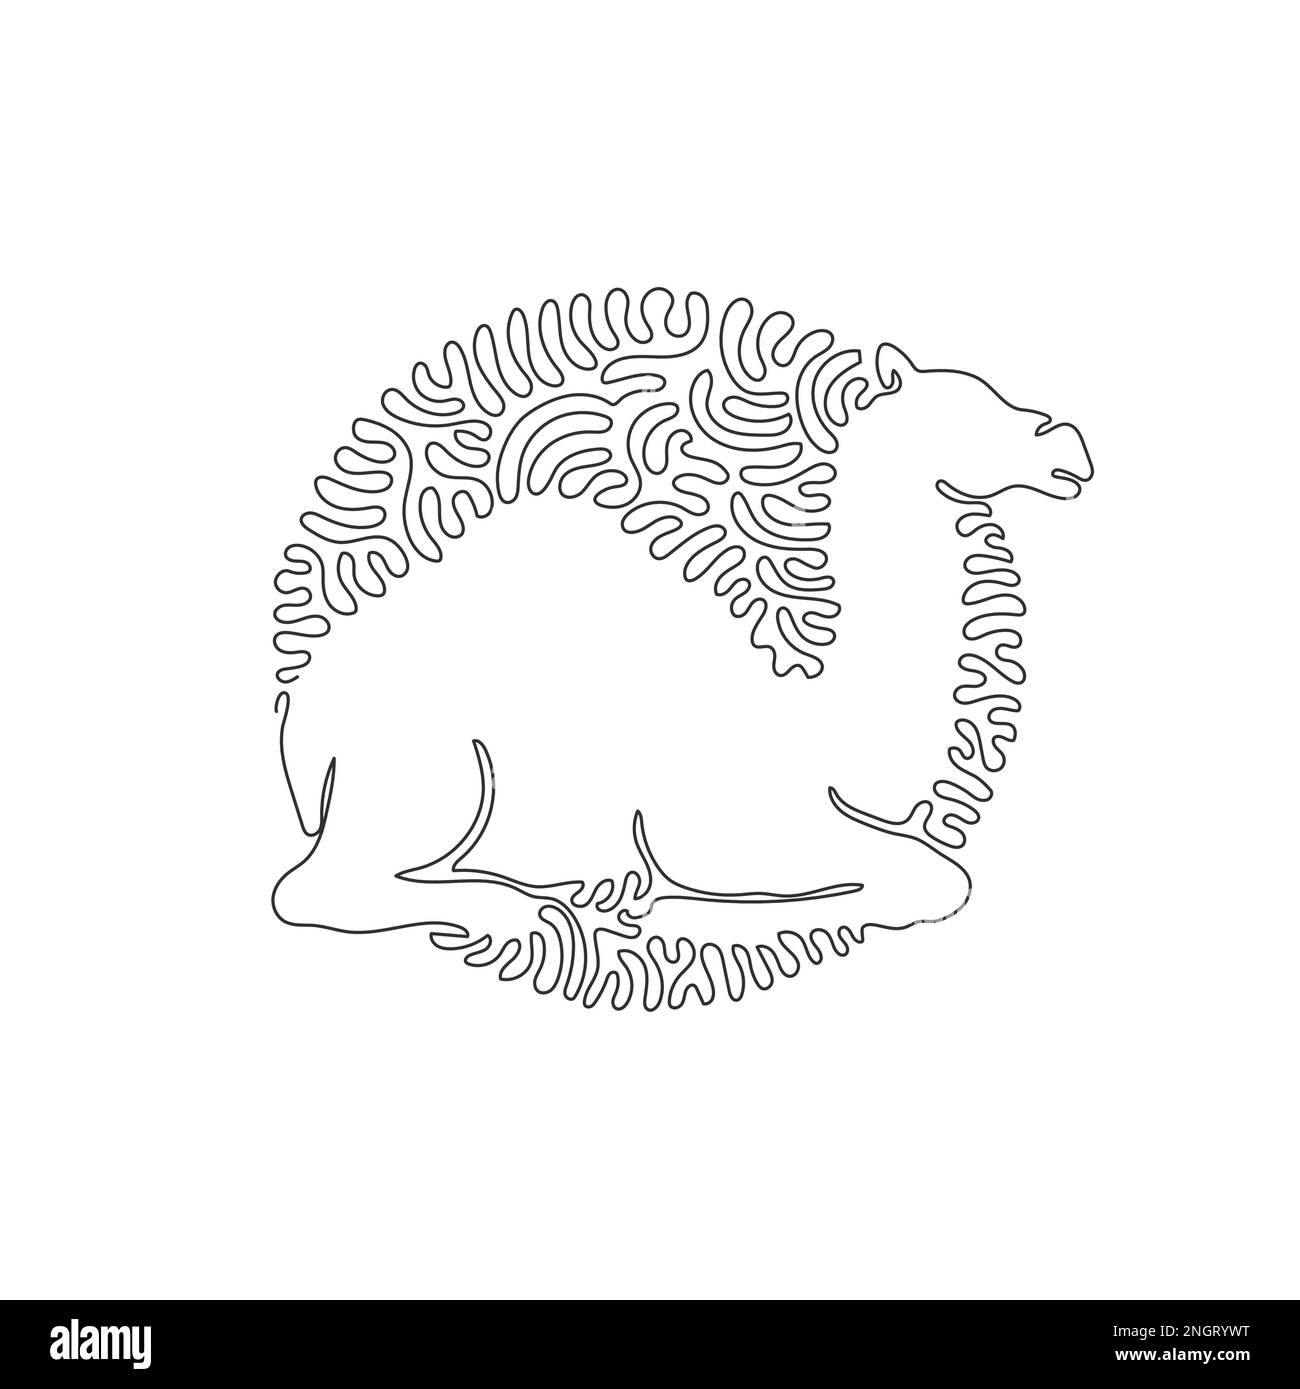 Single one line drawing of cute camel sitting abstract art. Continuous line drawing graphic vector illustration of camel has big lipped snout for Stock Vector